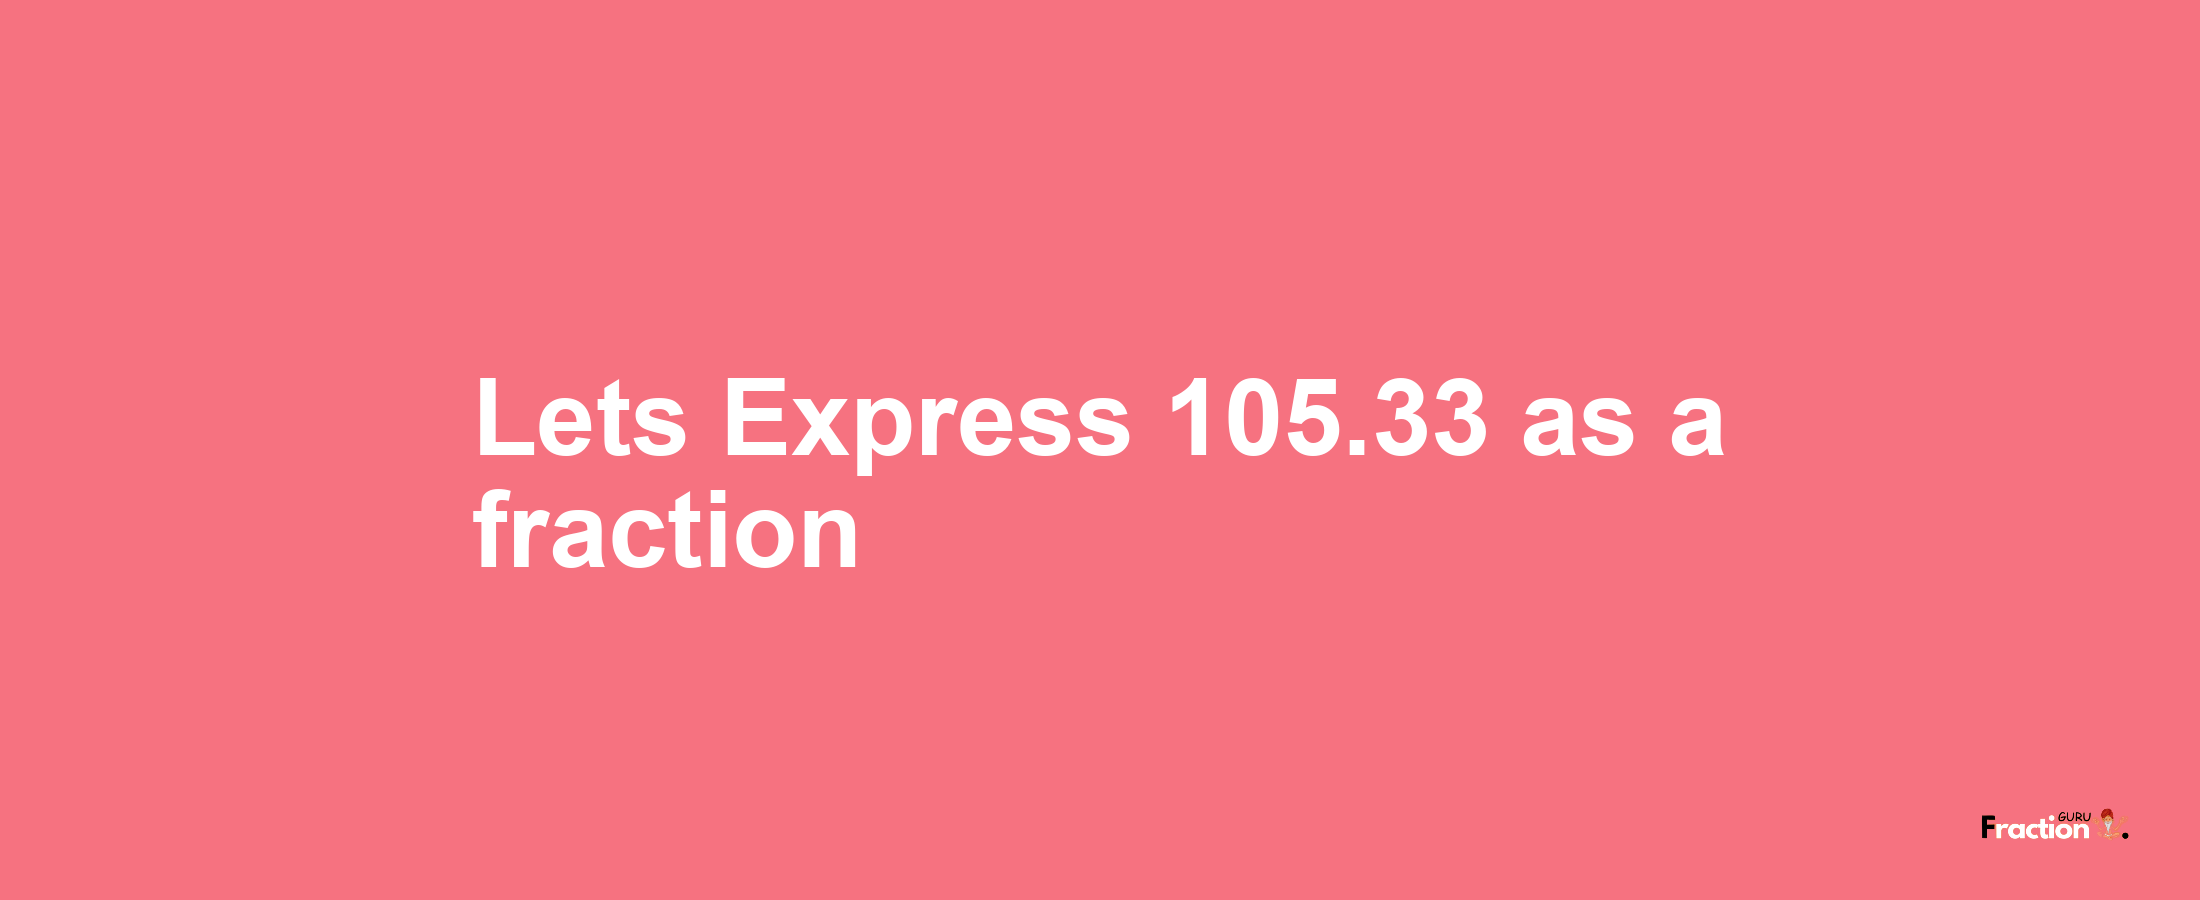 Lets Express 105.33 as afraction